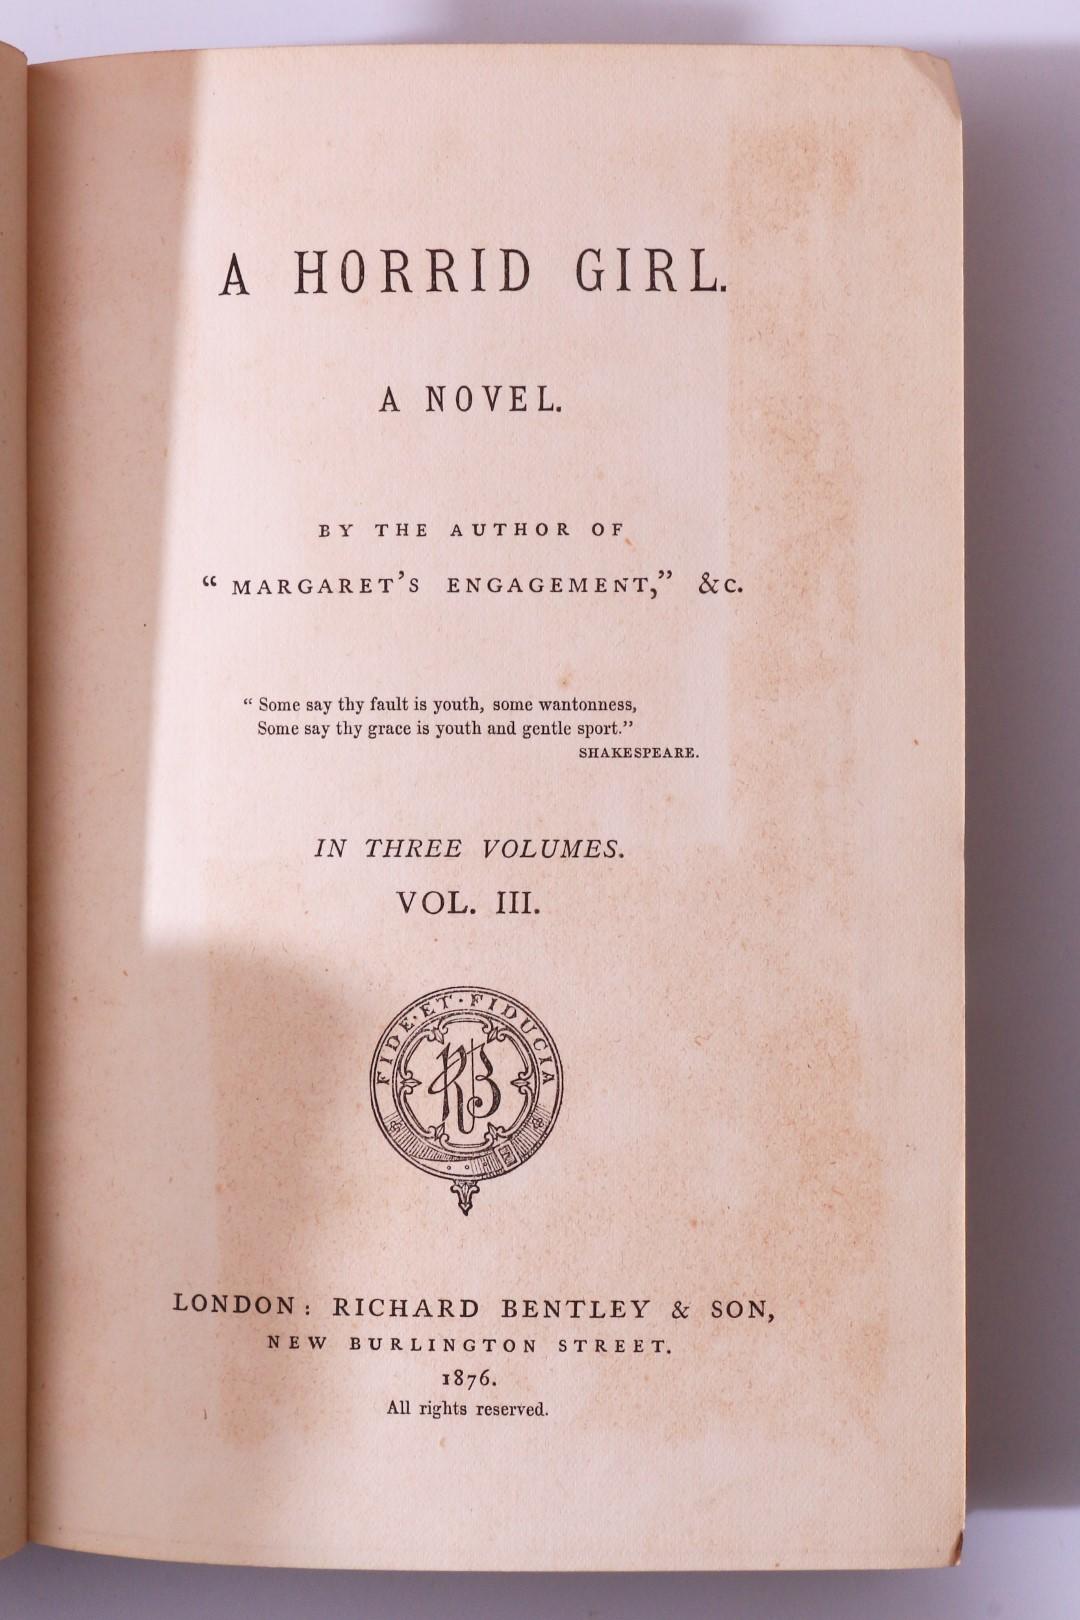 Anonymous [Catherine Simpson Wynne] - A Horrid Girl [by the author of Margaret's Engagement] - Richard Bentley, 1876, First Edition.